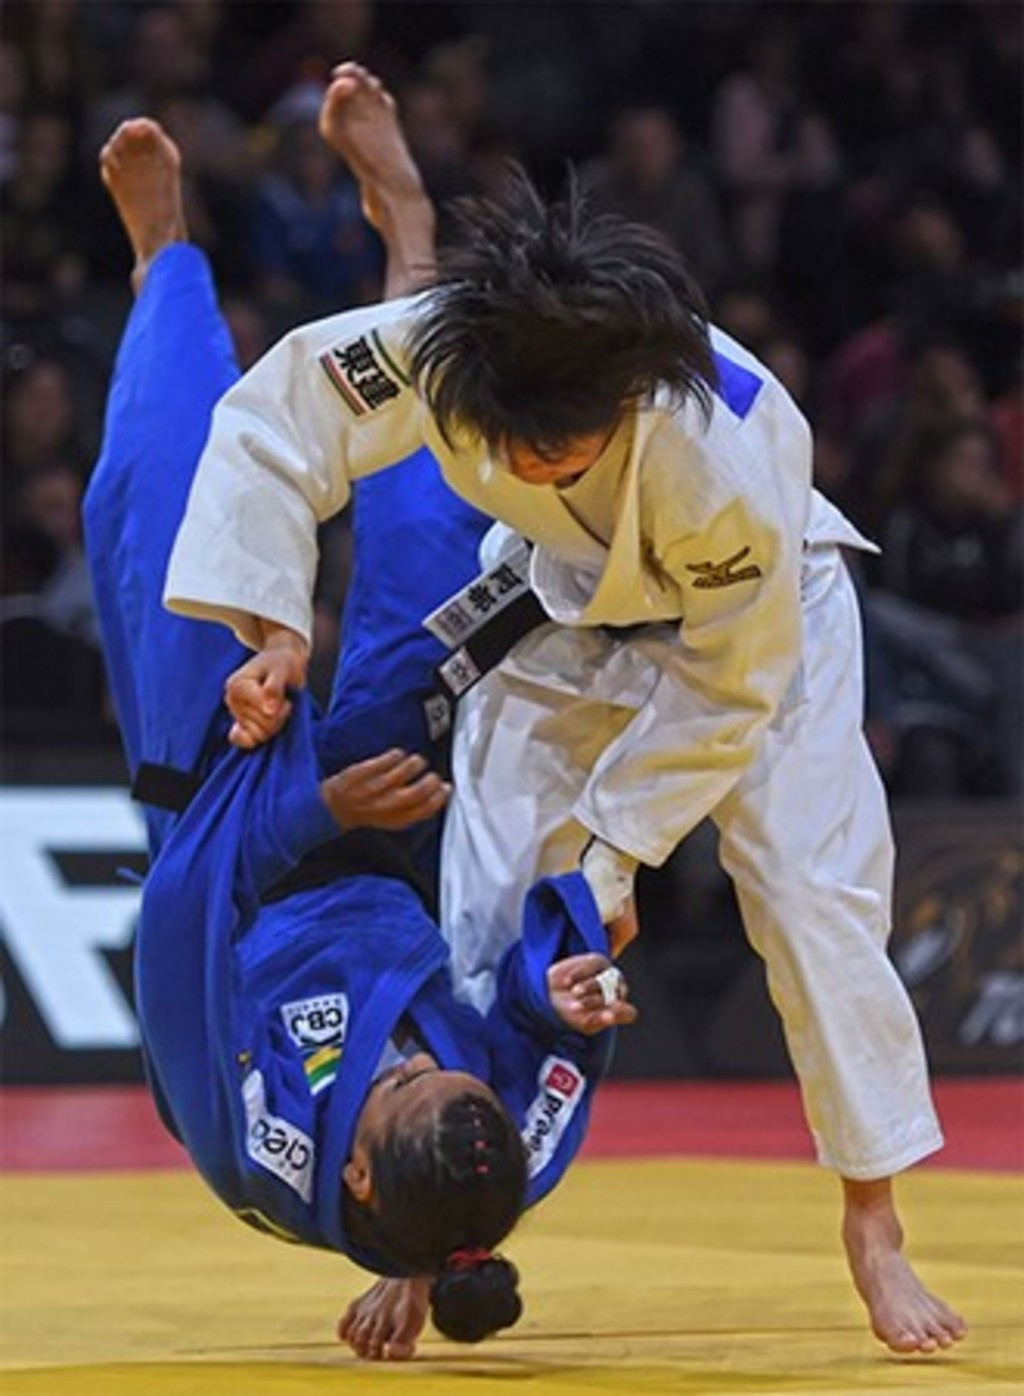 Japan's 17-year-old Abe Uta took just nine seconds to win her first bout against Brazil's Eleudis Valentim en route to the under 52kg gold medal in the Paris Grand Prix ©IJF